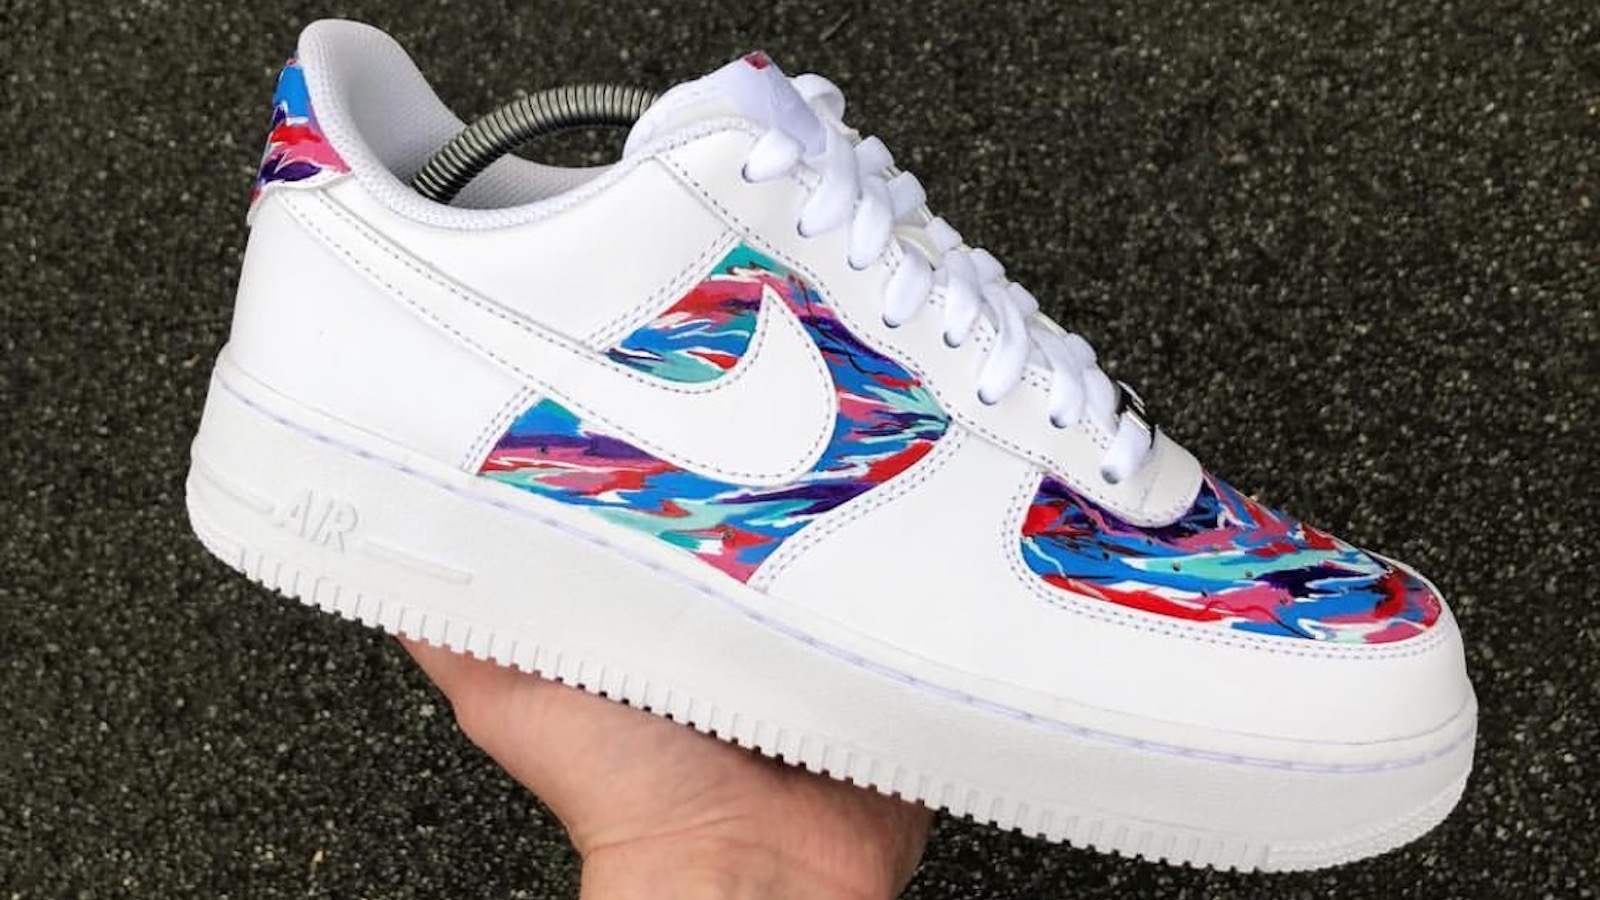 10 ways to customize your sneakers for the summer